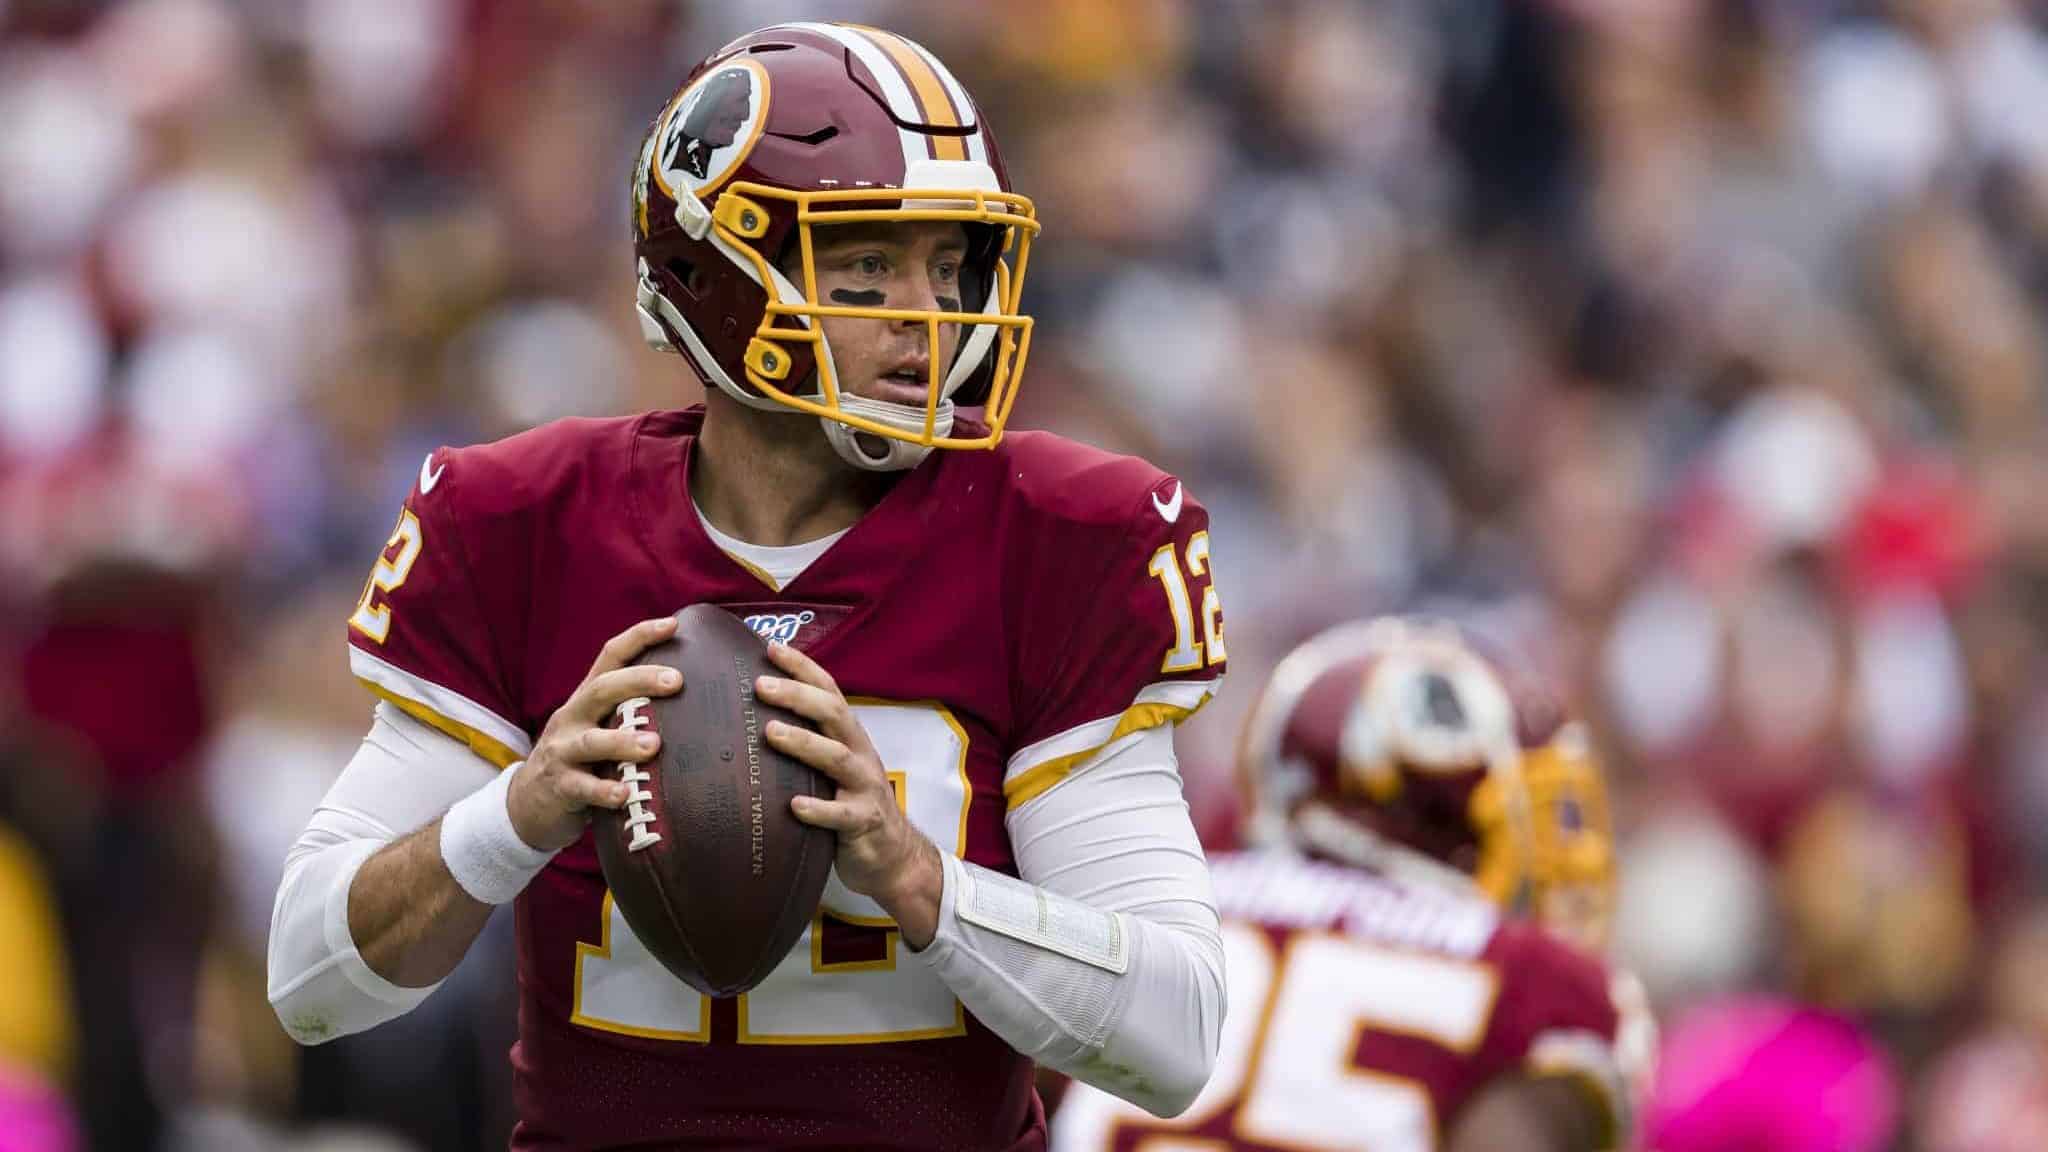 LANDOVER, MD - OCTOBER 06: Colt McCoy #12 of the Washington Redskins looks to pass against the New England Patriots during the first half at FedExField on October 6, 2019 in Landover, Maryland.